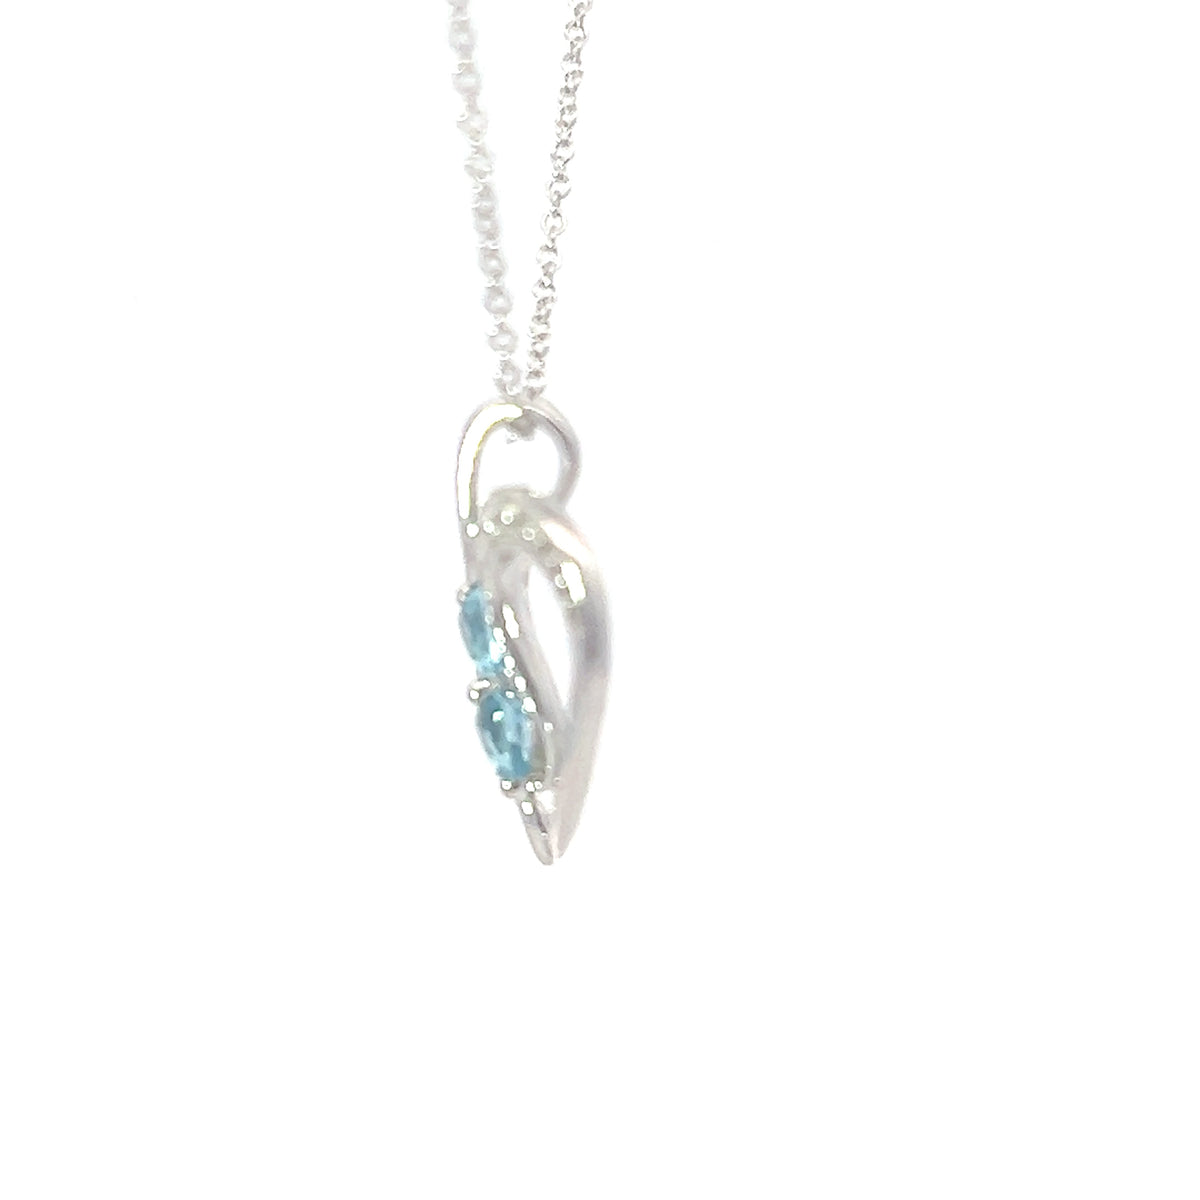 10K White Gold Swiss Blue Topaz and Diamond Heart Necklace - 18 Inches